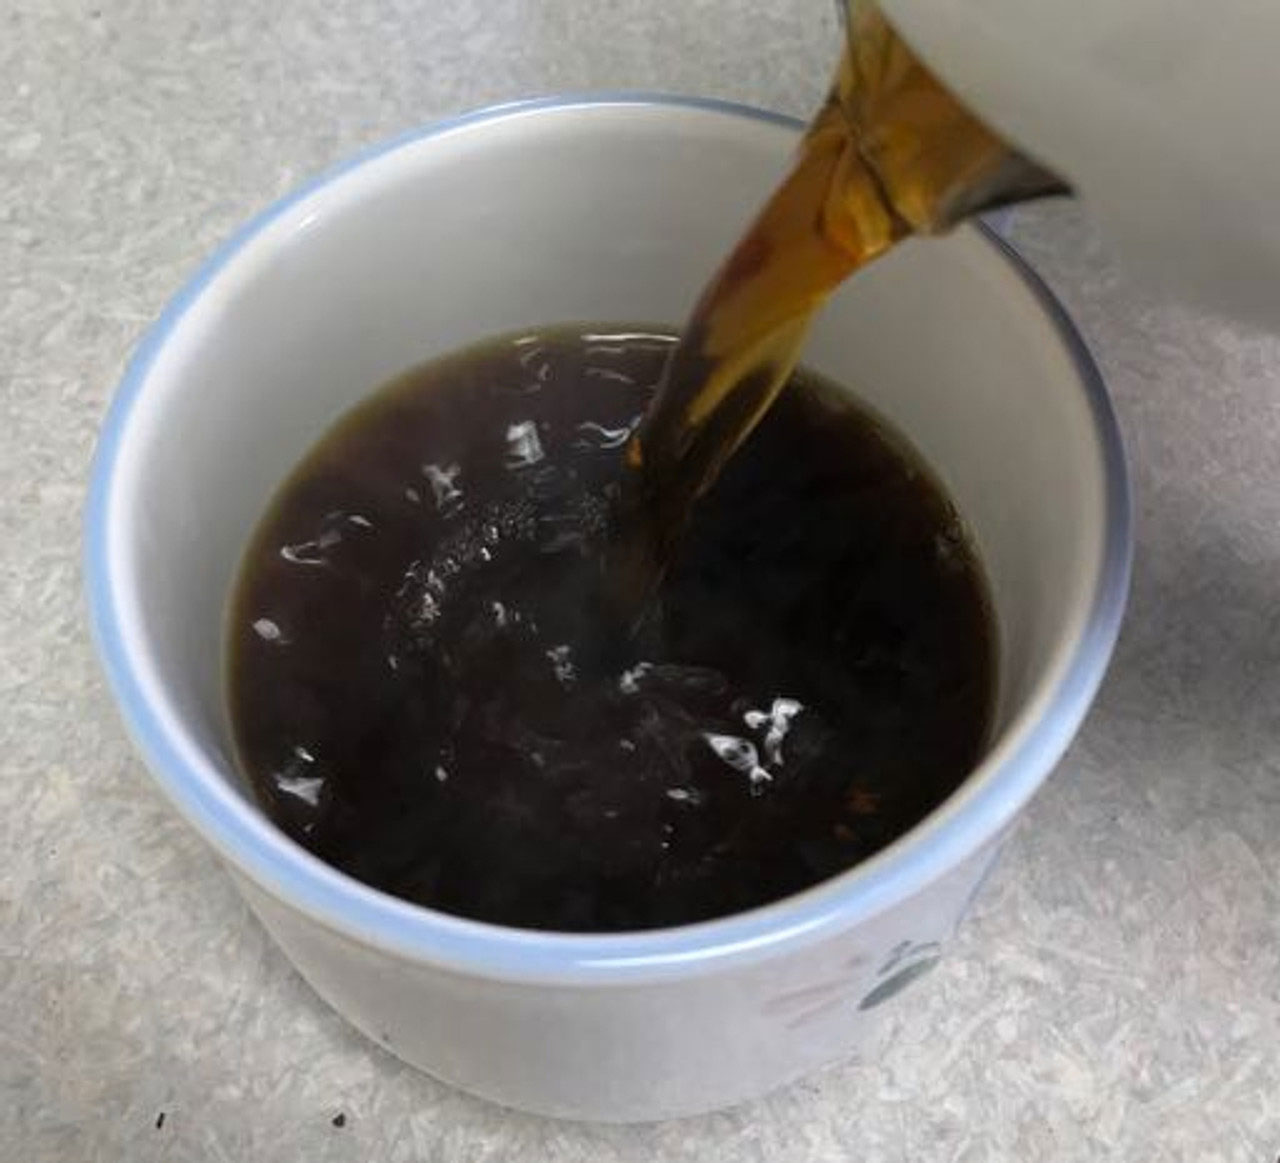 A close up of a pitcher pouring hot Laura Soybean coffee into a white teacup.